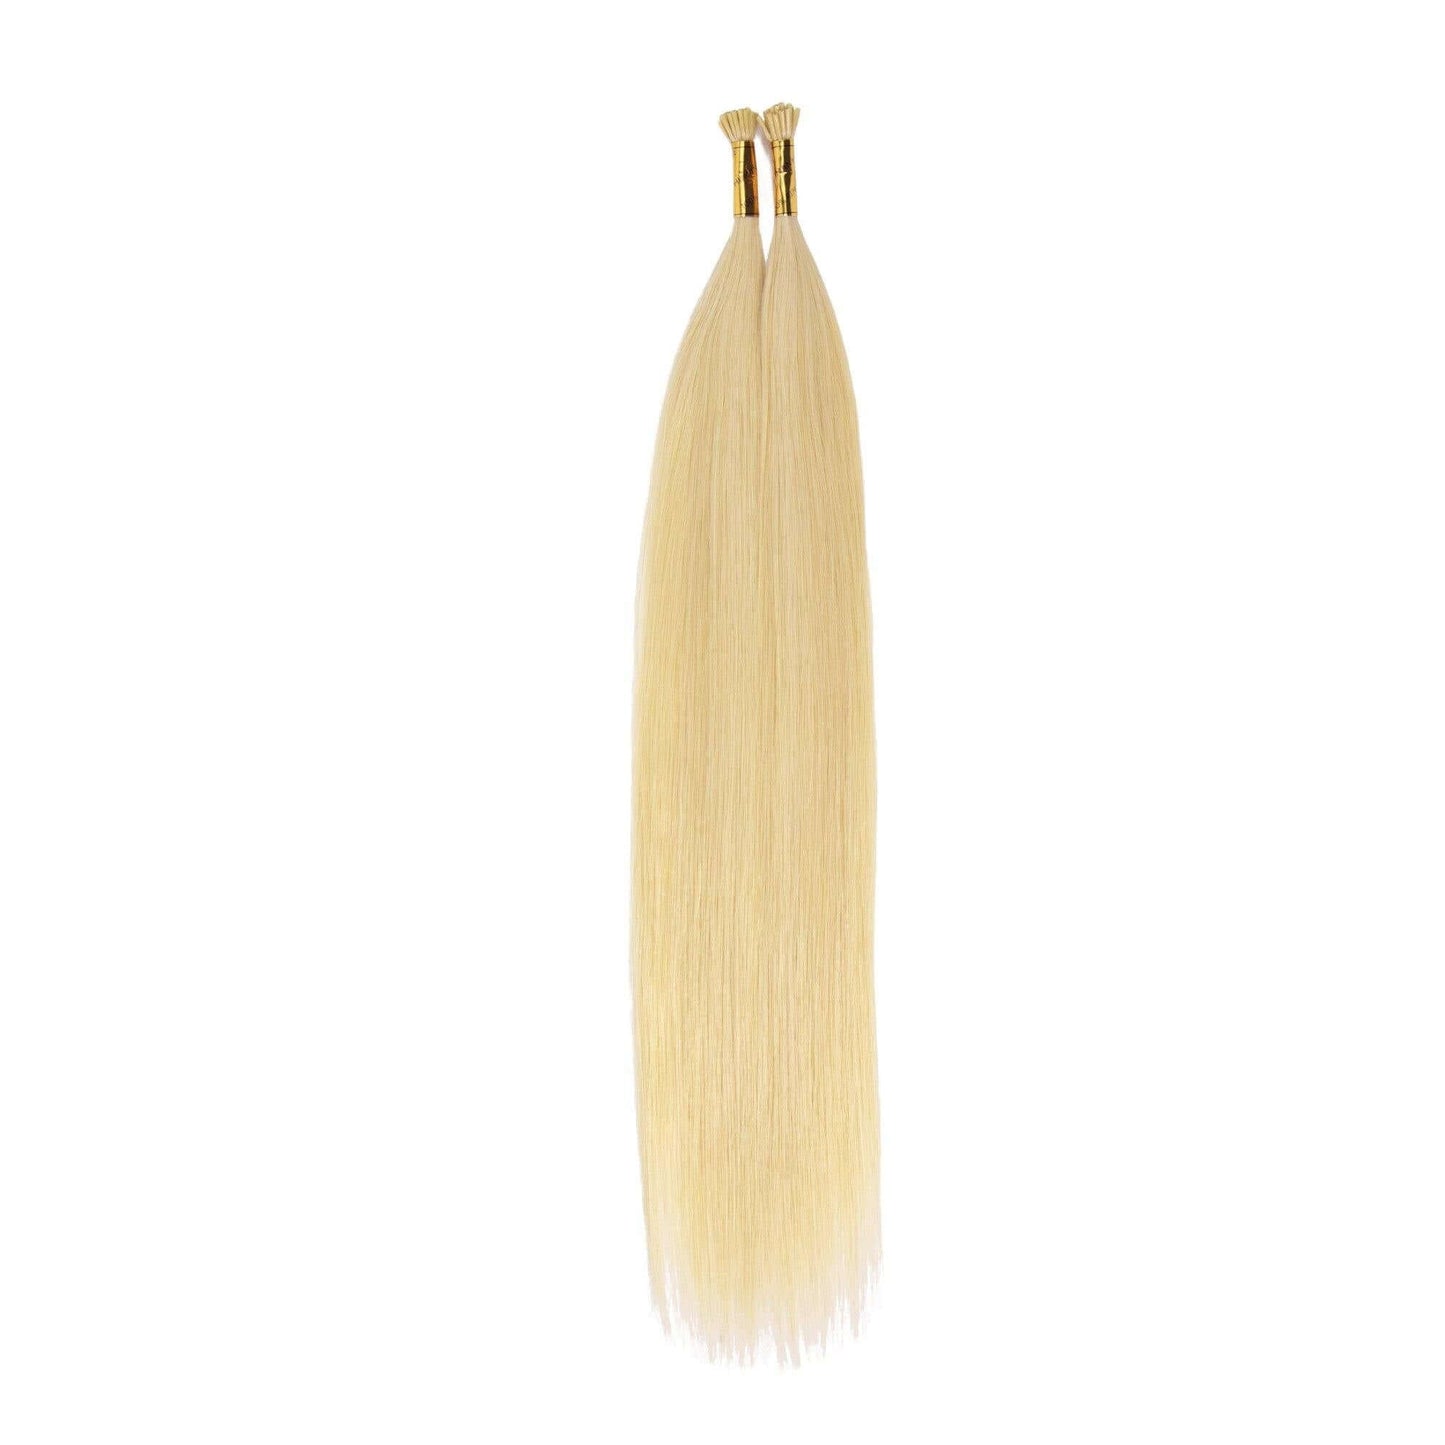 18" Bohyme Luxe - I-Tip - Silky Straight - 60pcs - BL613 - BLIS60-18-BL613